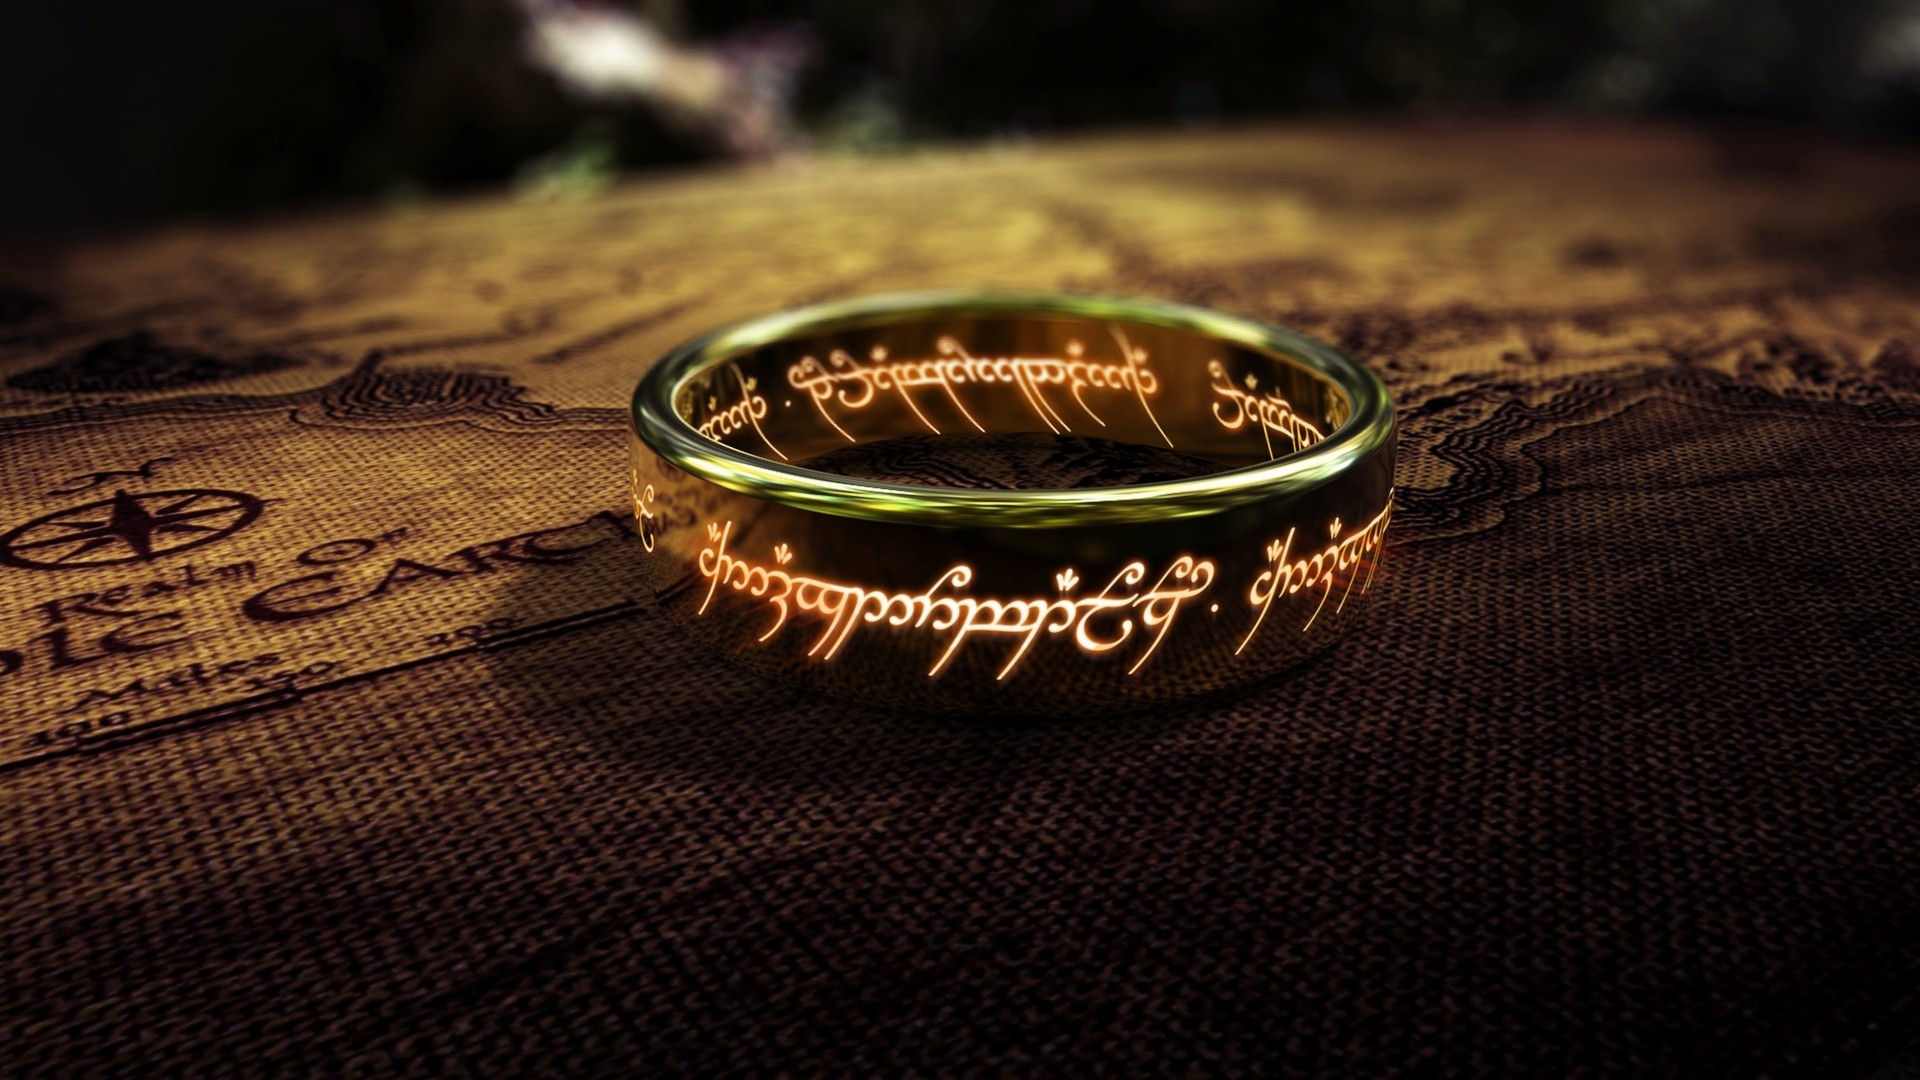 The Lord Of Rings High Definition Wallpaper